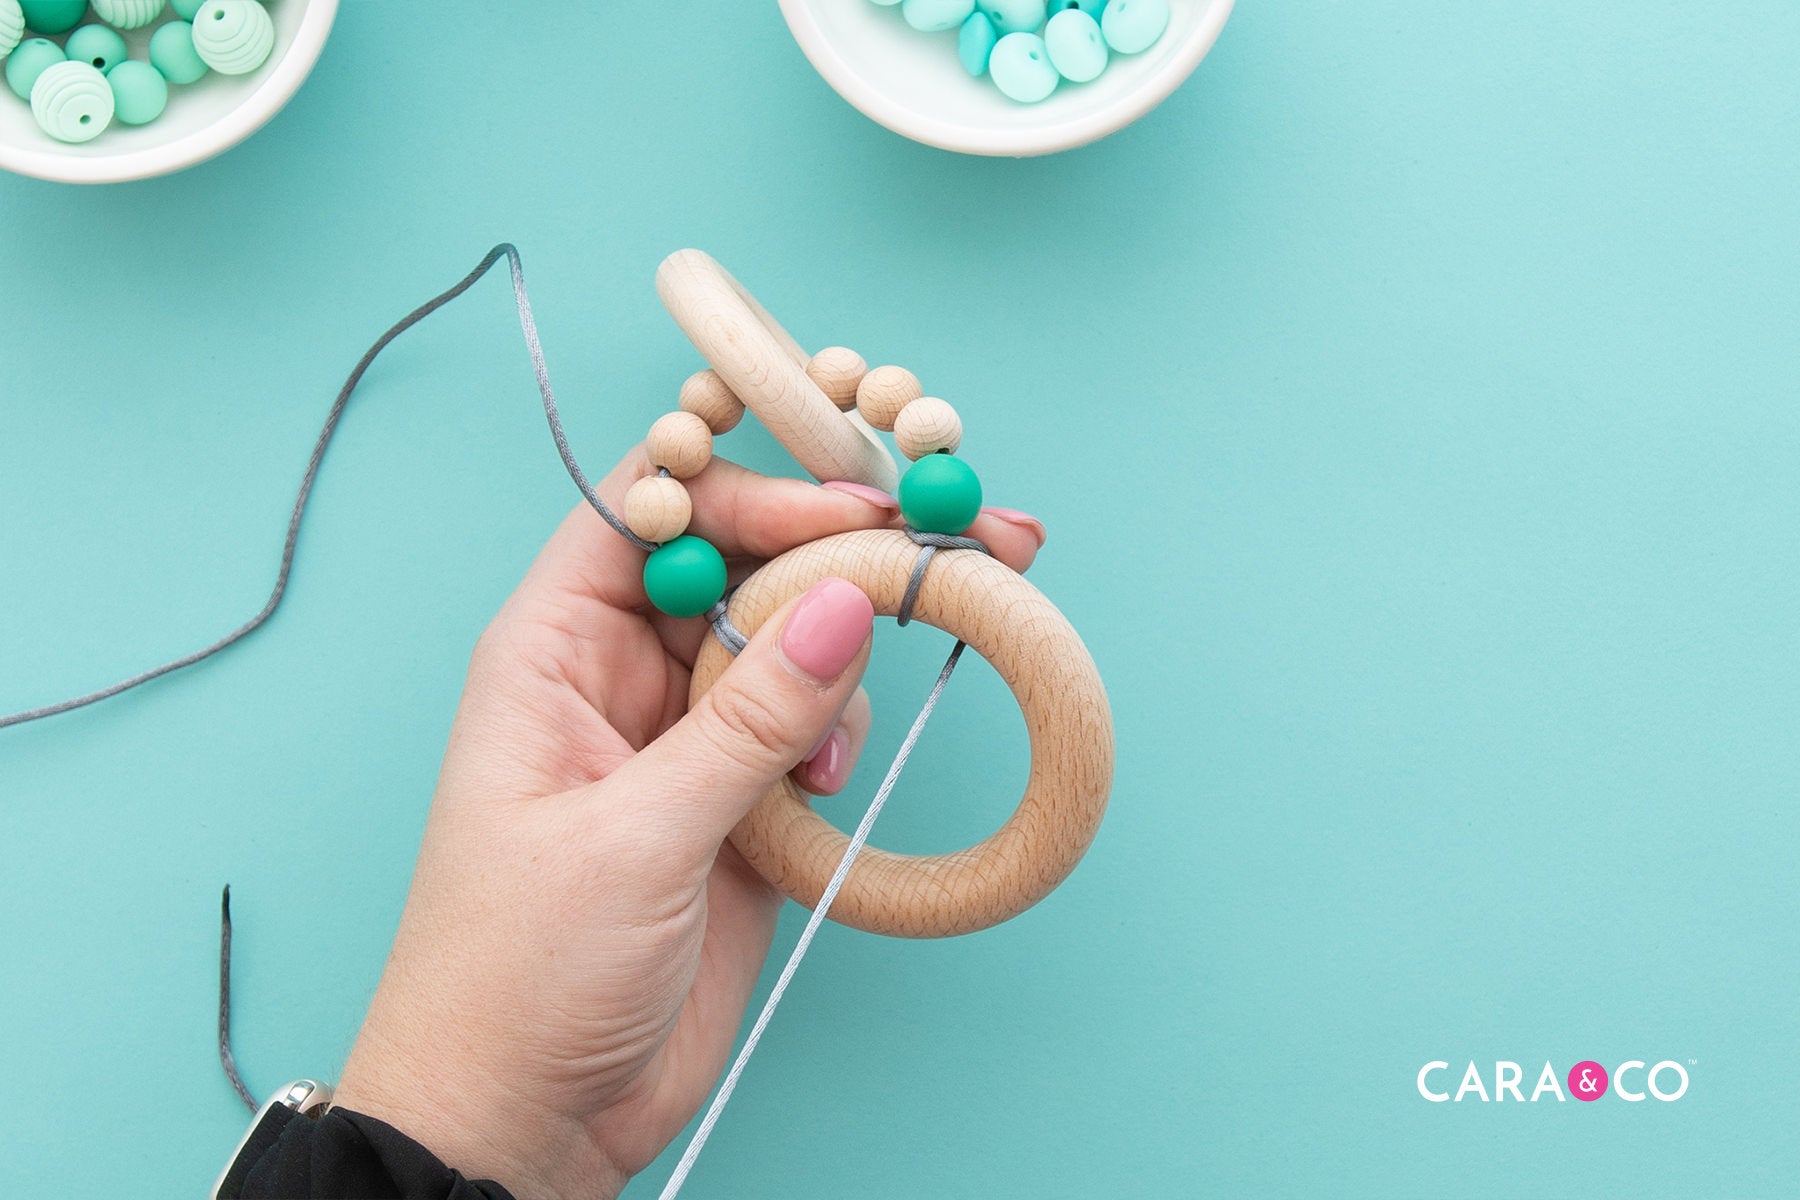 Wood Ring Baby Toy Tutorial - Cara & Co